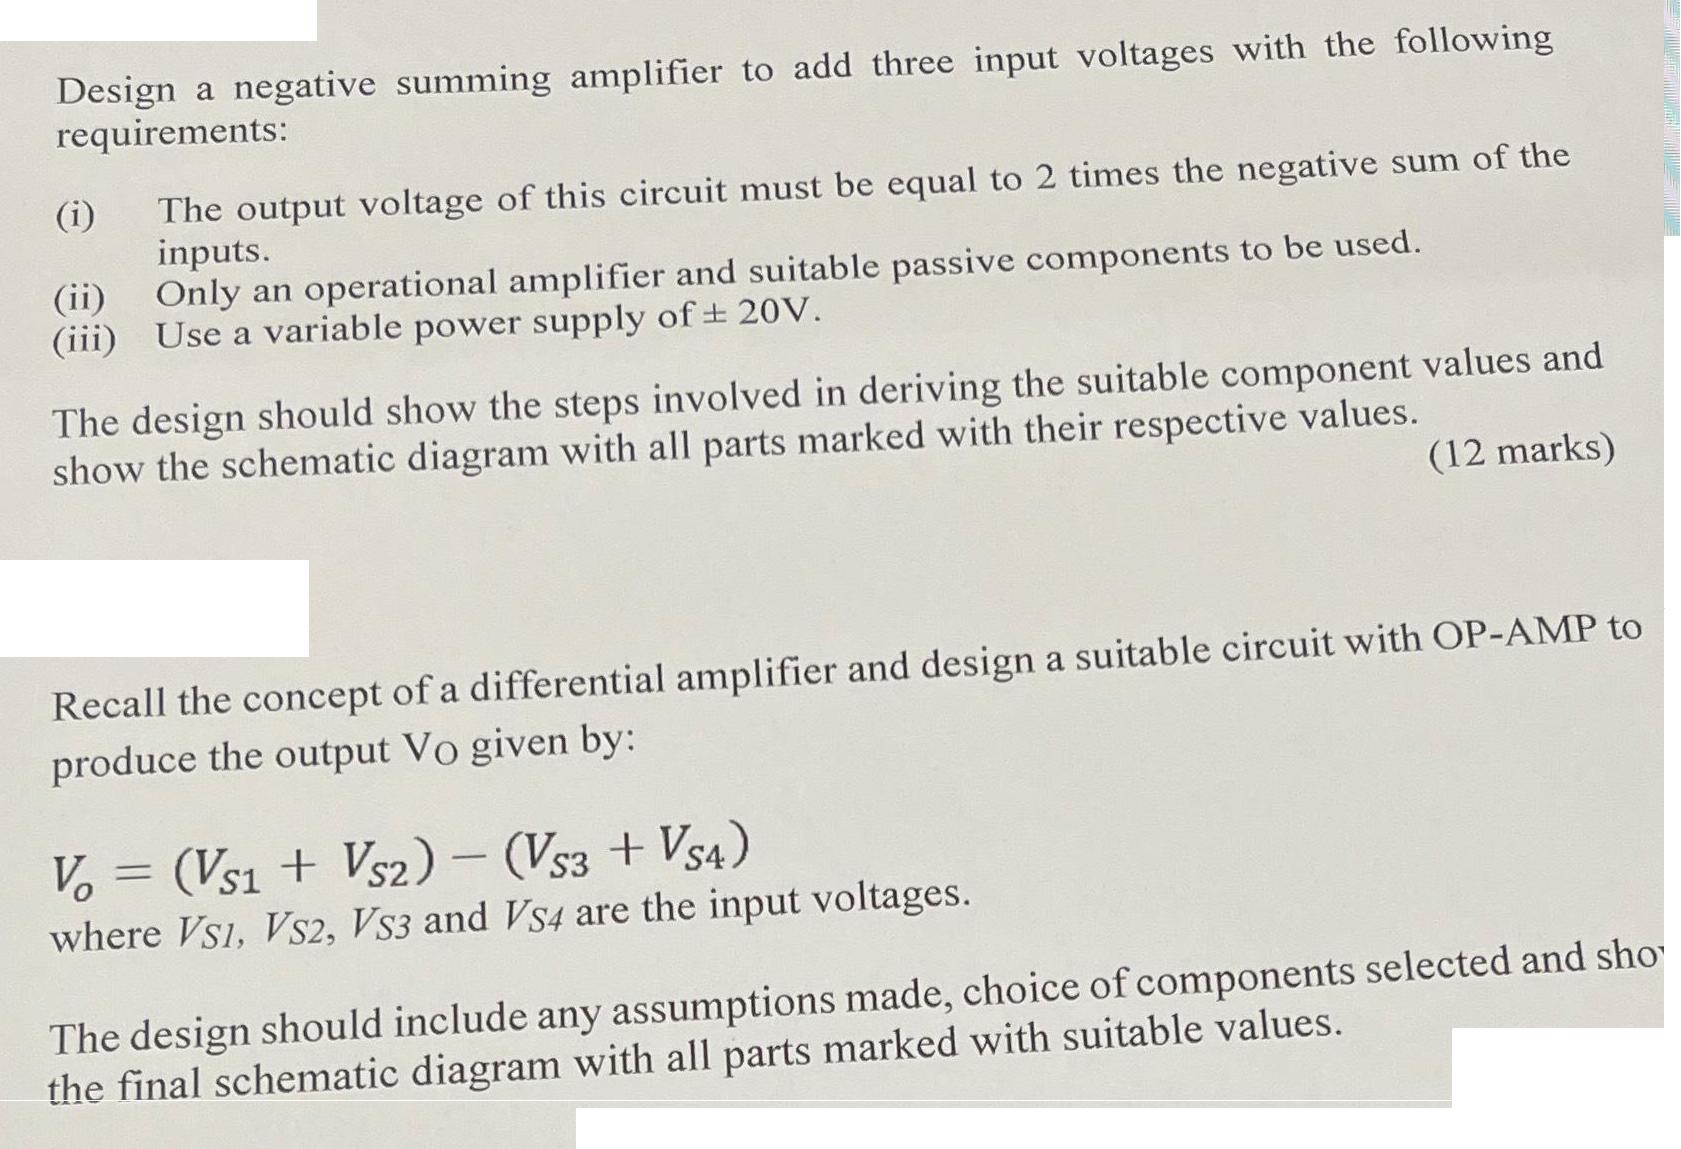 Design a negative summing amplifier to add three input voltages with the following requirements: (i) The